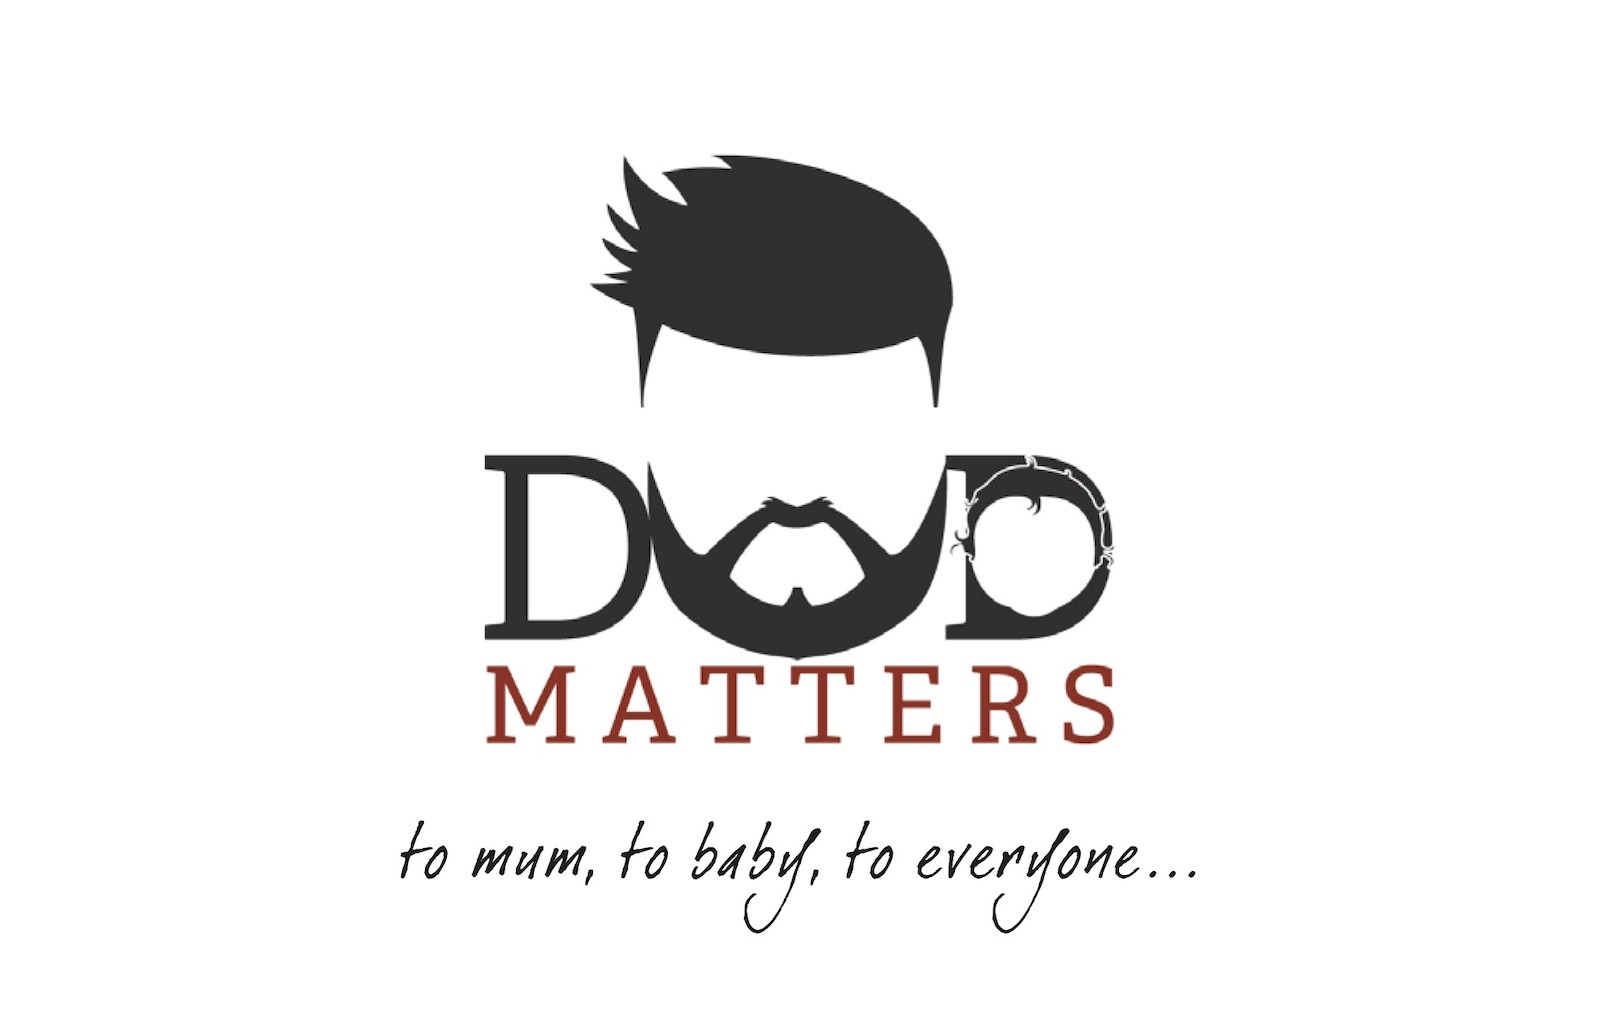 Dad Matters, to mum, to baby, to everyone...